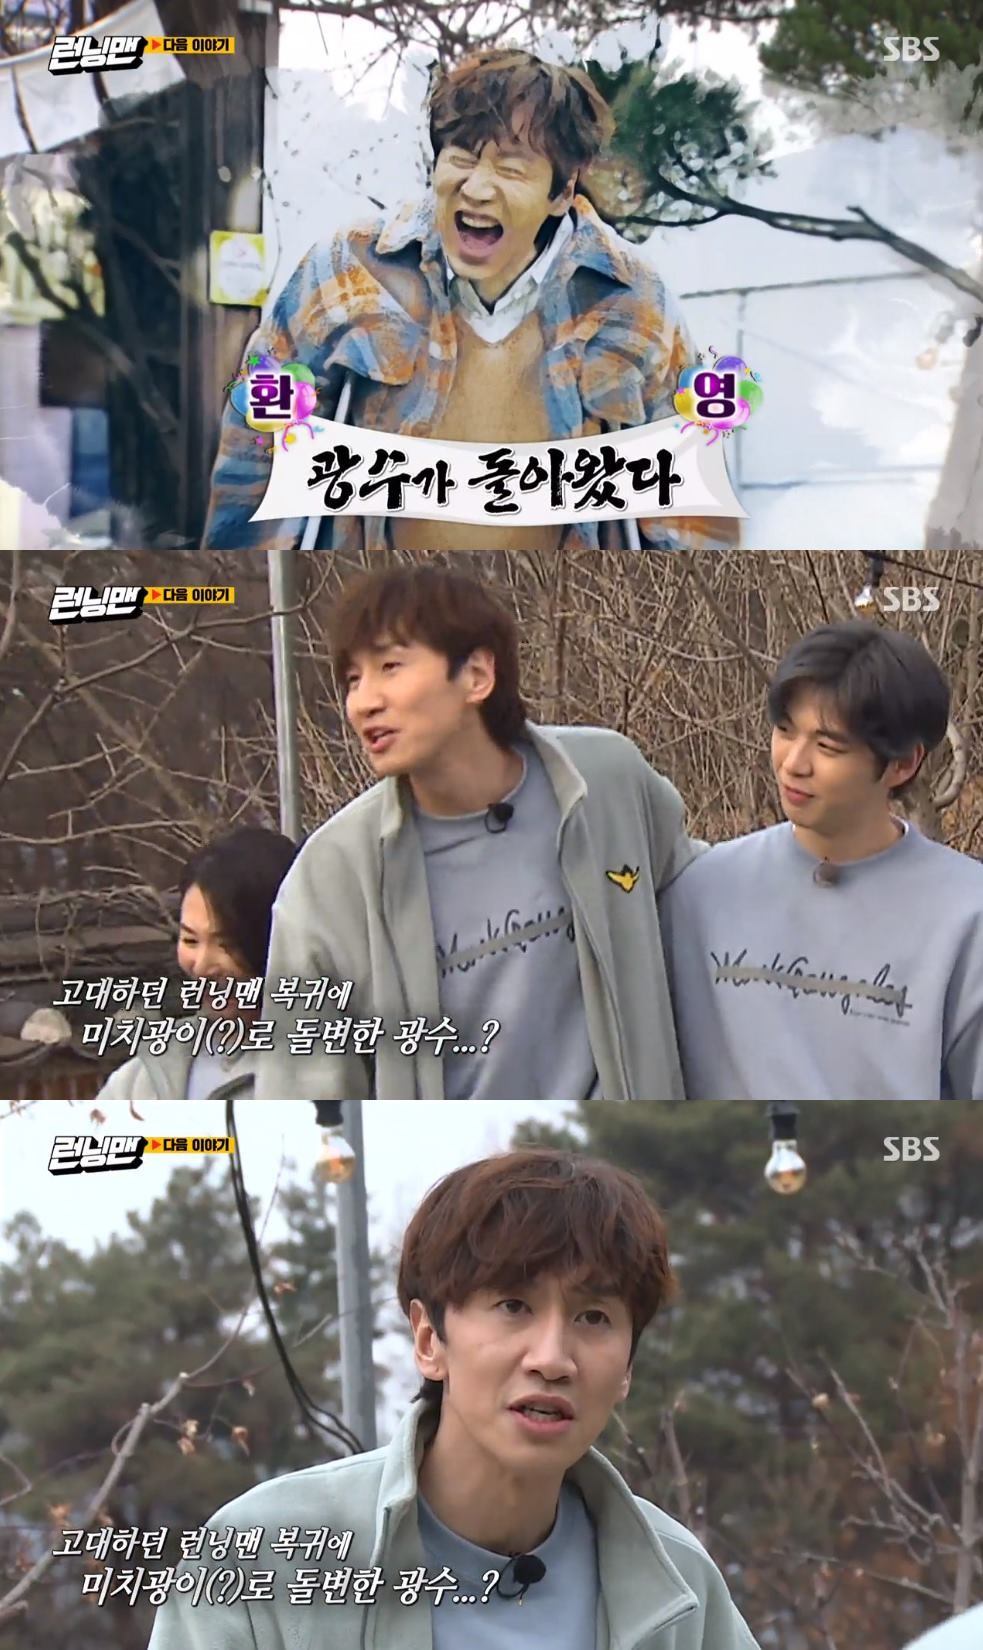 Actor Lee Kwangsoo, who has been Acident, will return through SBS Running Man next week.Lee Kwangsoos agency, King Kong Entertainment, said on the 16th, Lee Kwangsoo is returning to Running Man. The condition has improved a lot, but it is not a complete recovery.We are still working on the treatment, and we are careful, he said.On Running Man broadcast on the 15th, next weeks trailer was released, and Lee Kwangsoo was expected to return.Lee Kwangsoo, who is still on crutches, did not seem to have been cured, but was full of energy, especially a madman on his return to the ancient Running Man (?), and his performance was more anticipated by the subtitle Kwangsoo.Lee Kwangsoo is not cured, but appears to have quickly returned to his affection and willingness to Running Man.He is in a position to participate in the line that does not go to the body for the time being and to be careful.Lee Kwangsoo was in contact with a signal-breaking vehicle on February 15, so he was diagnosed with a right ankle fracture and has been treated.As a result, Lee Kwangsoo did not attend the recording of Running Man for two consecutive weeks.On behalf of the members, Yoo Jae-seok said, Kwangsoo was injured in his ankle and could not participate in the recording.I need to have surgery, he said. I hope you will recover well and return to health quickly. 